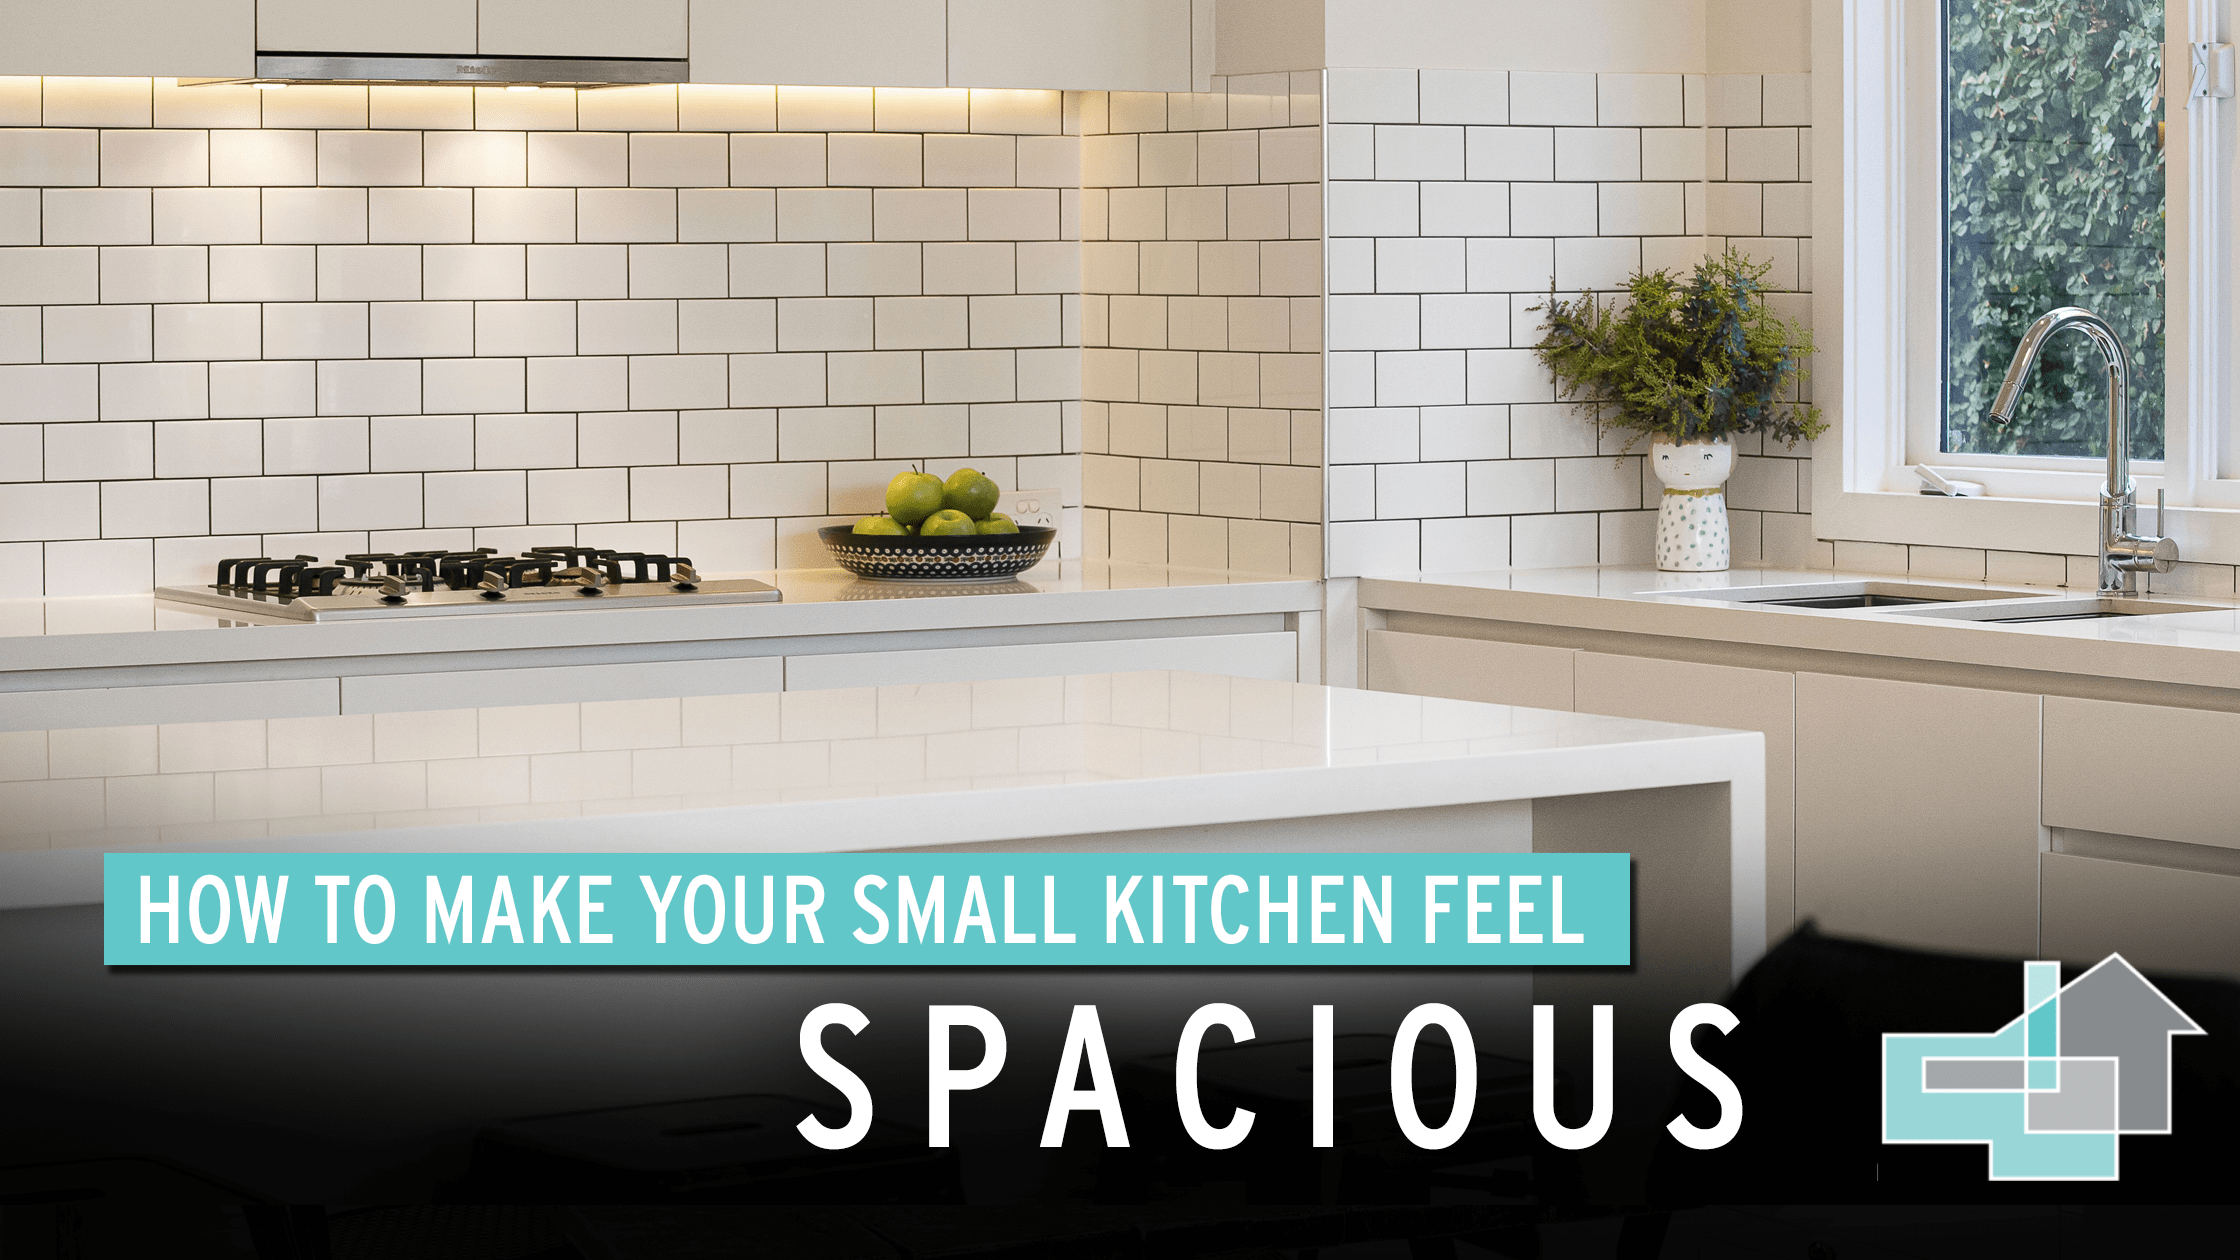 How to Make Your Small Kitchen Feel Spacious